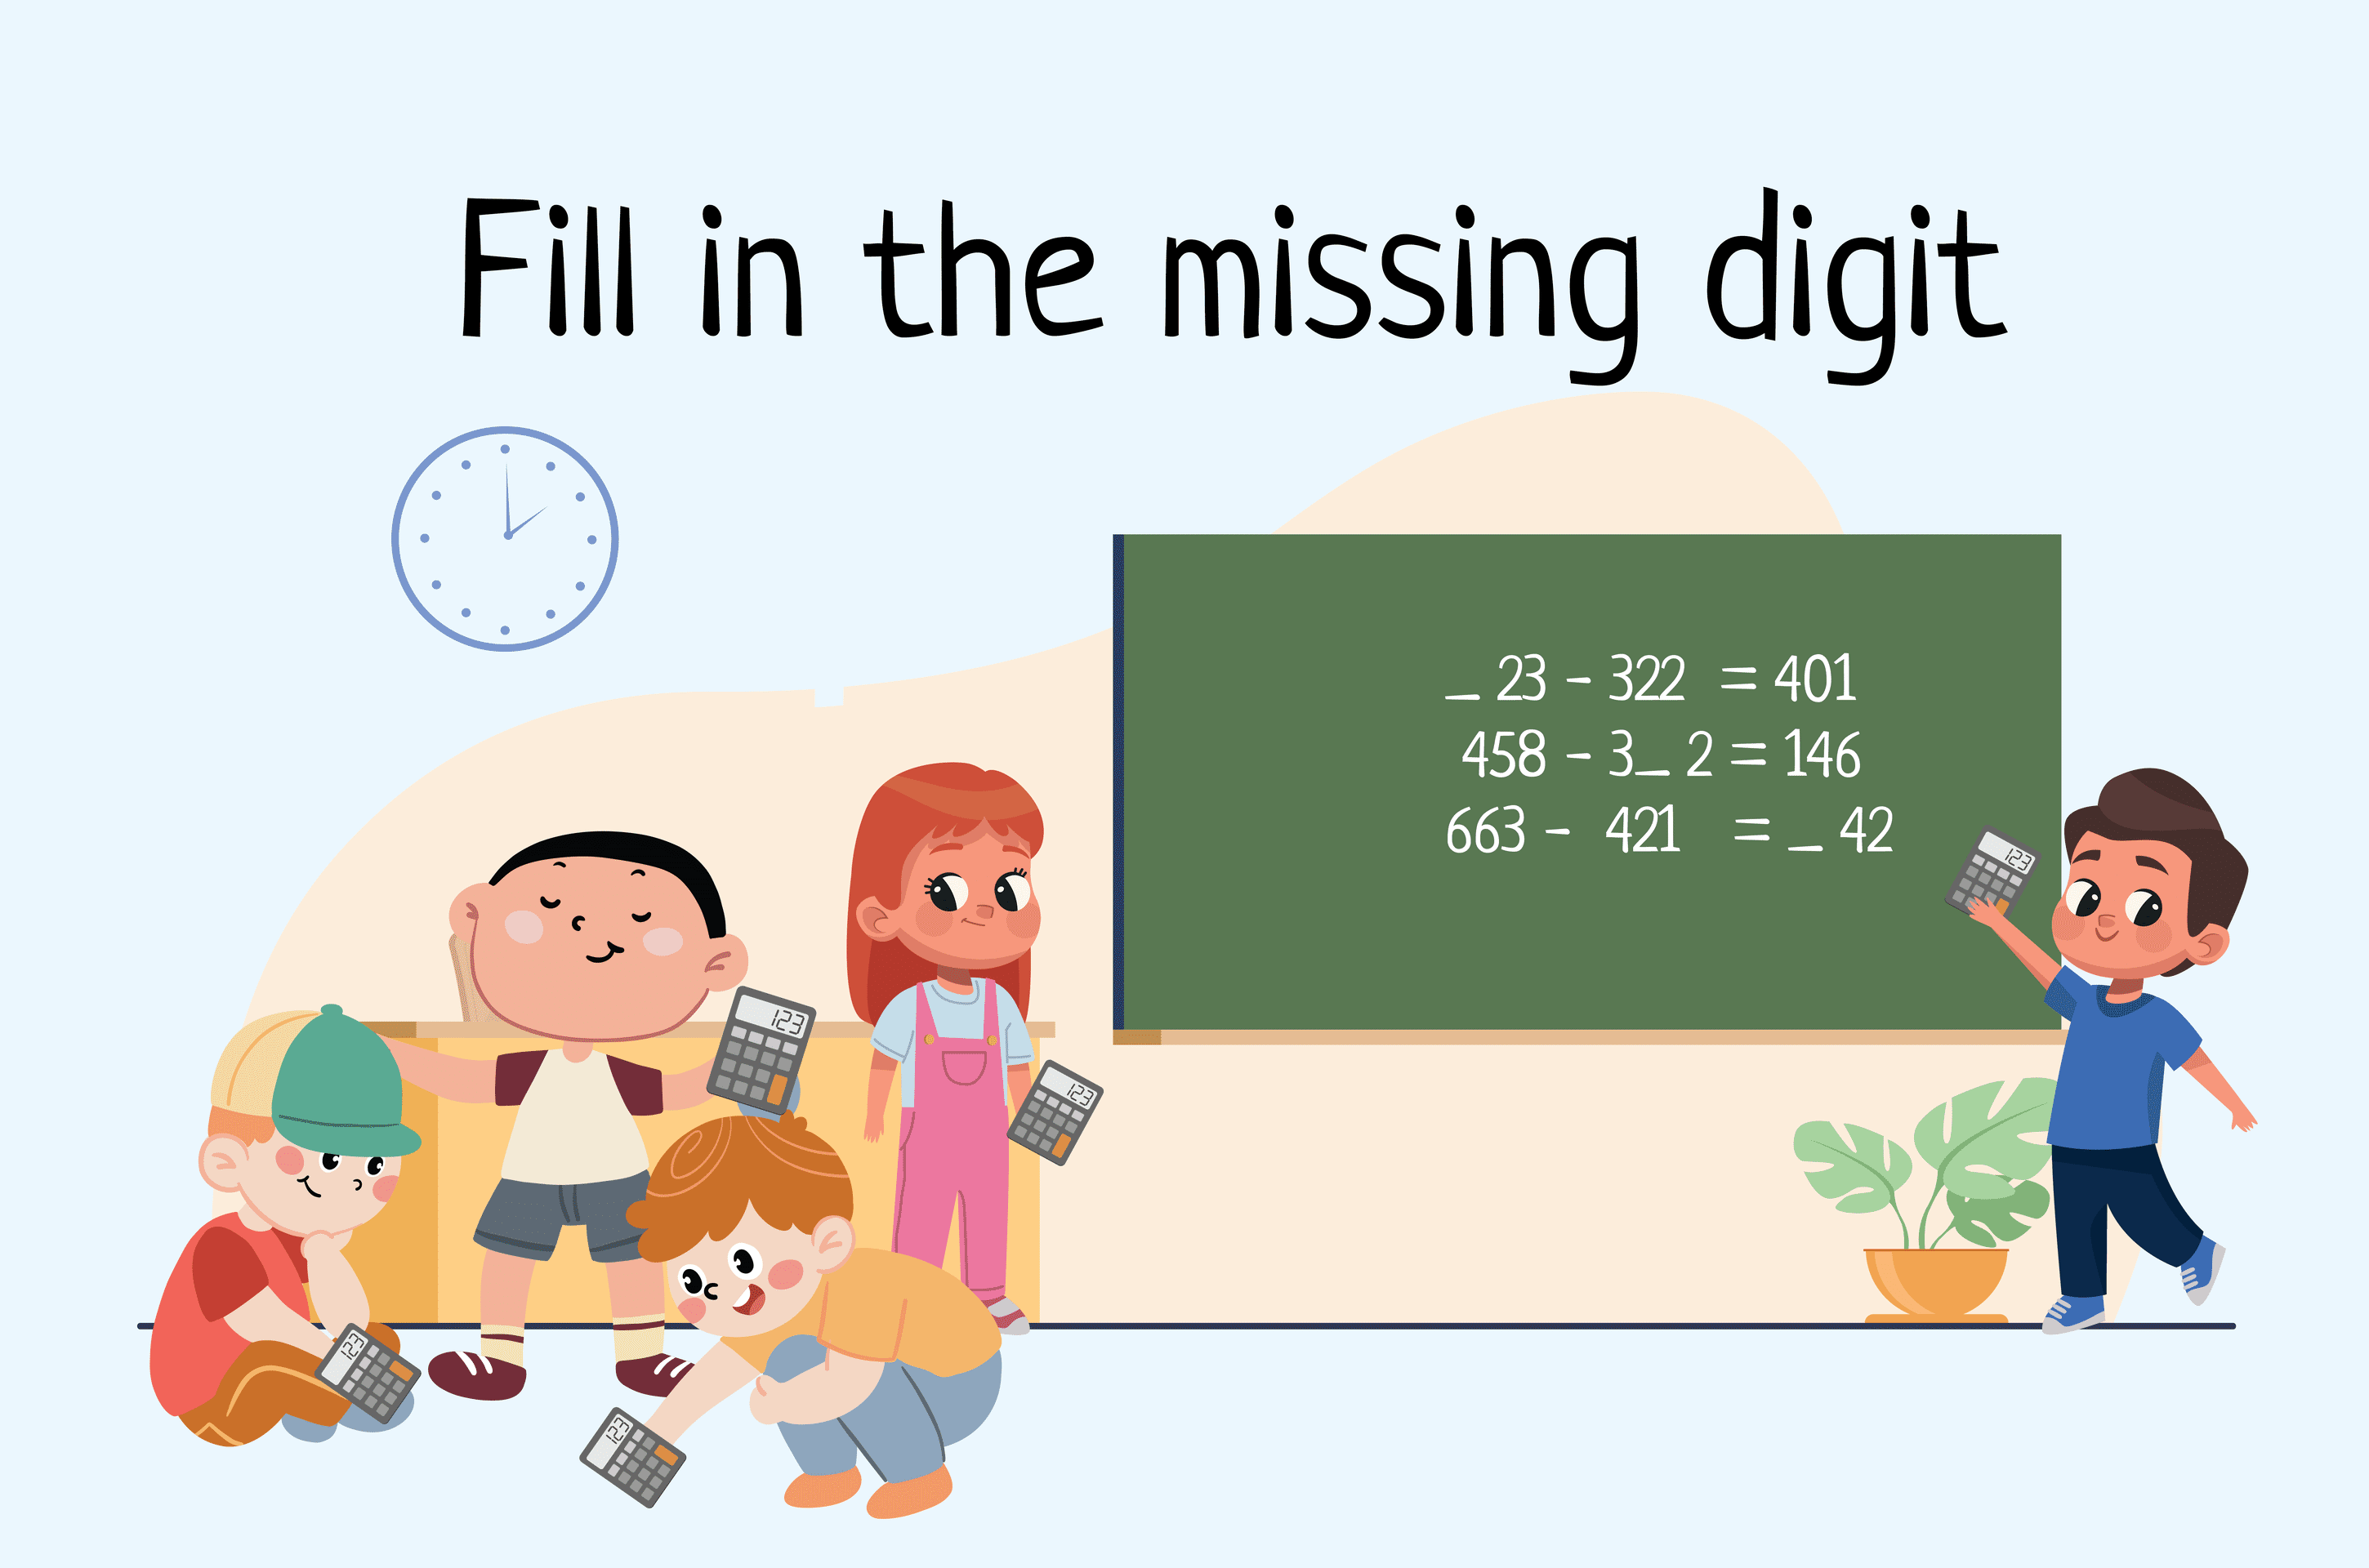 Fill in the missing digit